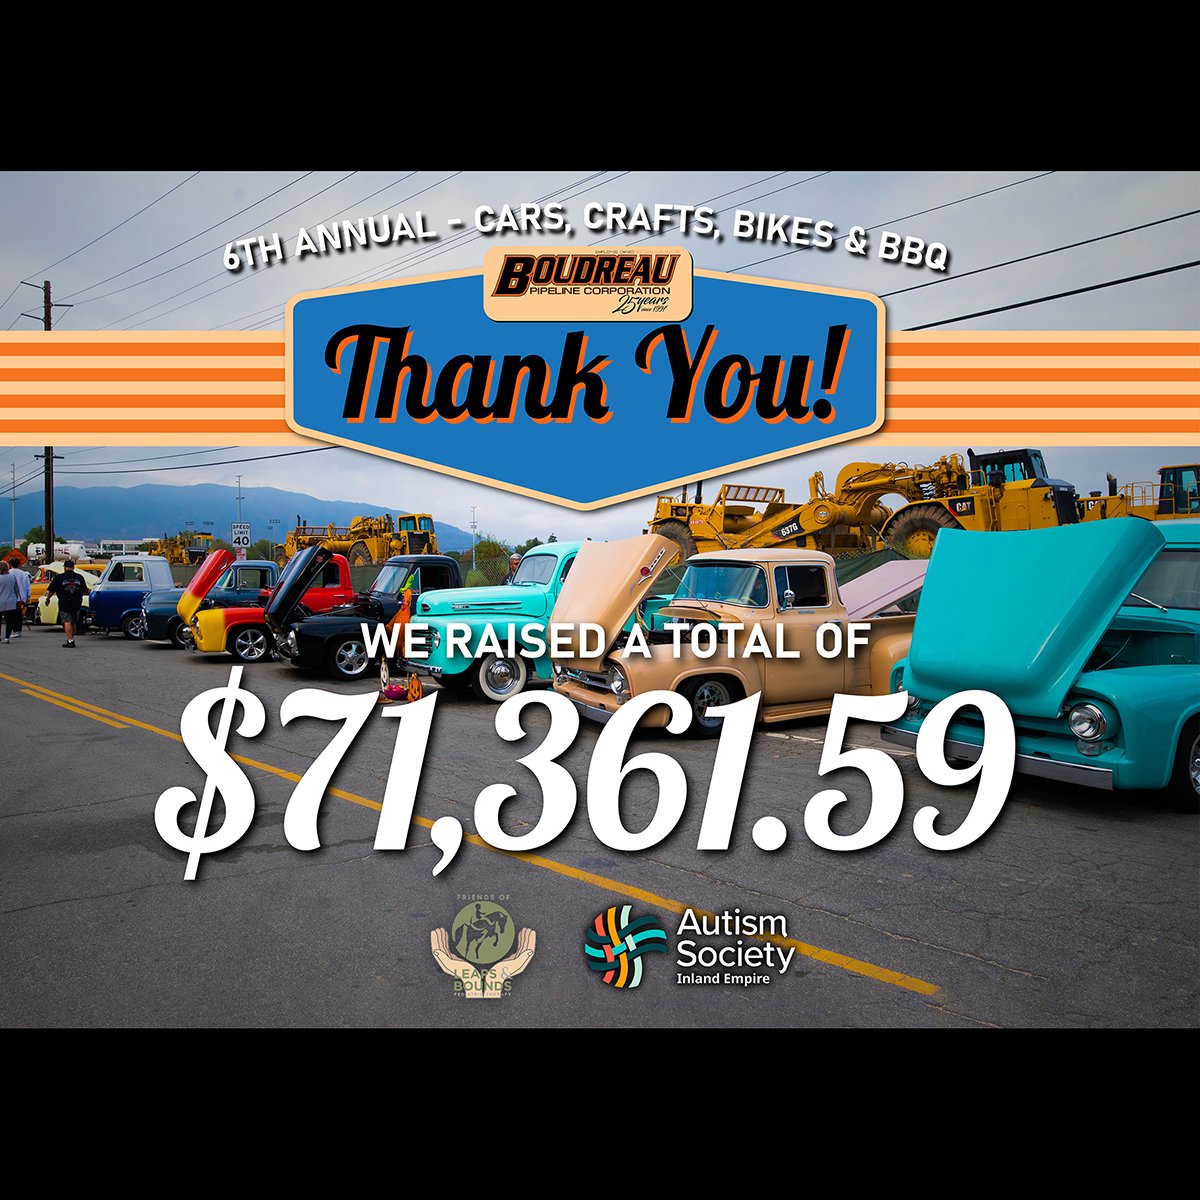 Charity Car Show Breaks Records!